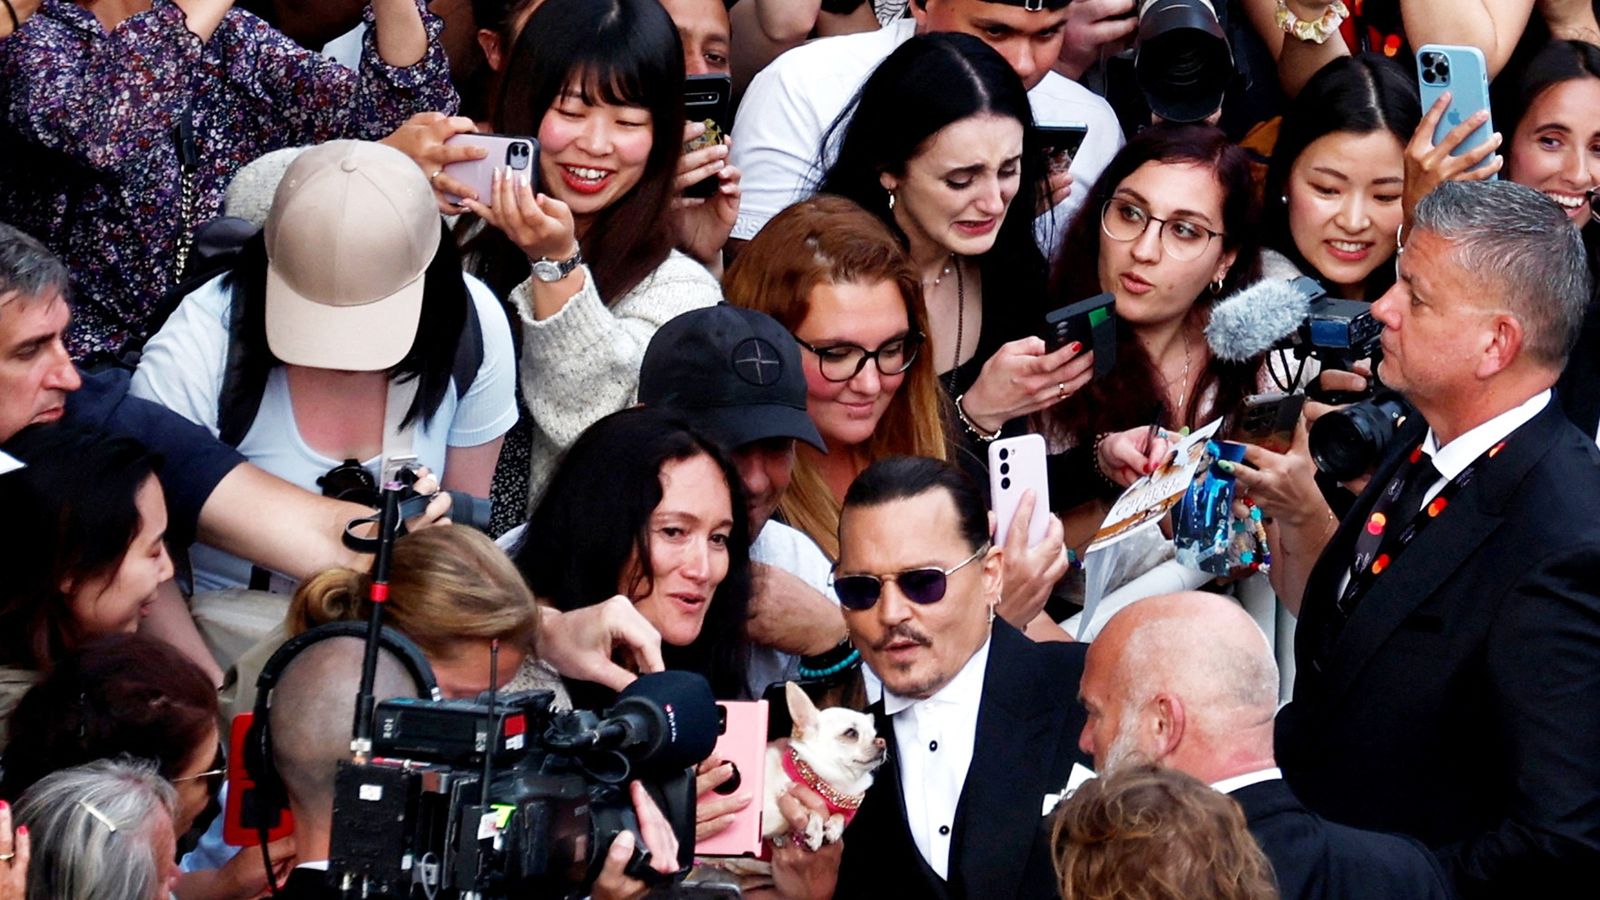 Cannes kicks off with huge standing ovation for Johnny Depp and an award for Michael Douglas